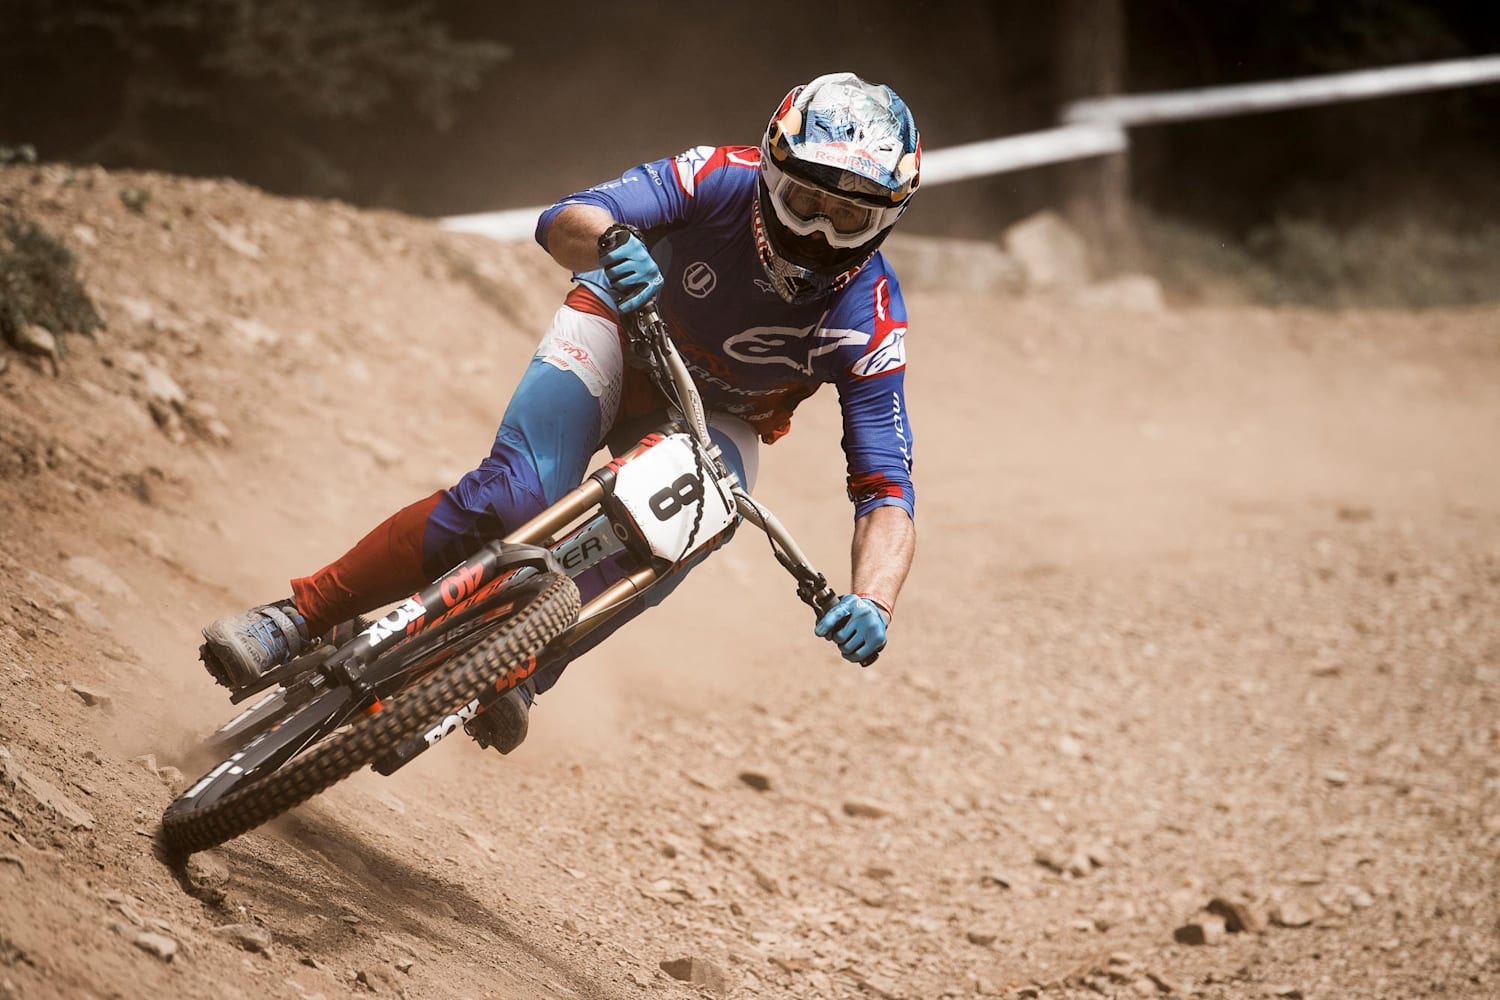 UCI DH World Champs 2018 Practice highlights ++video++